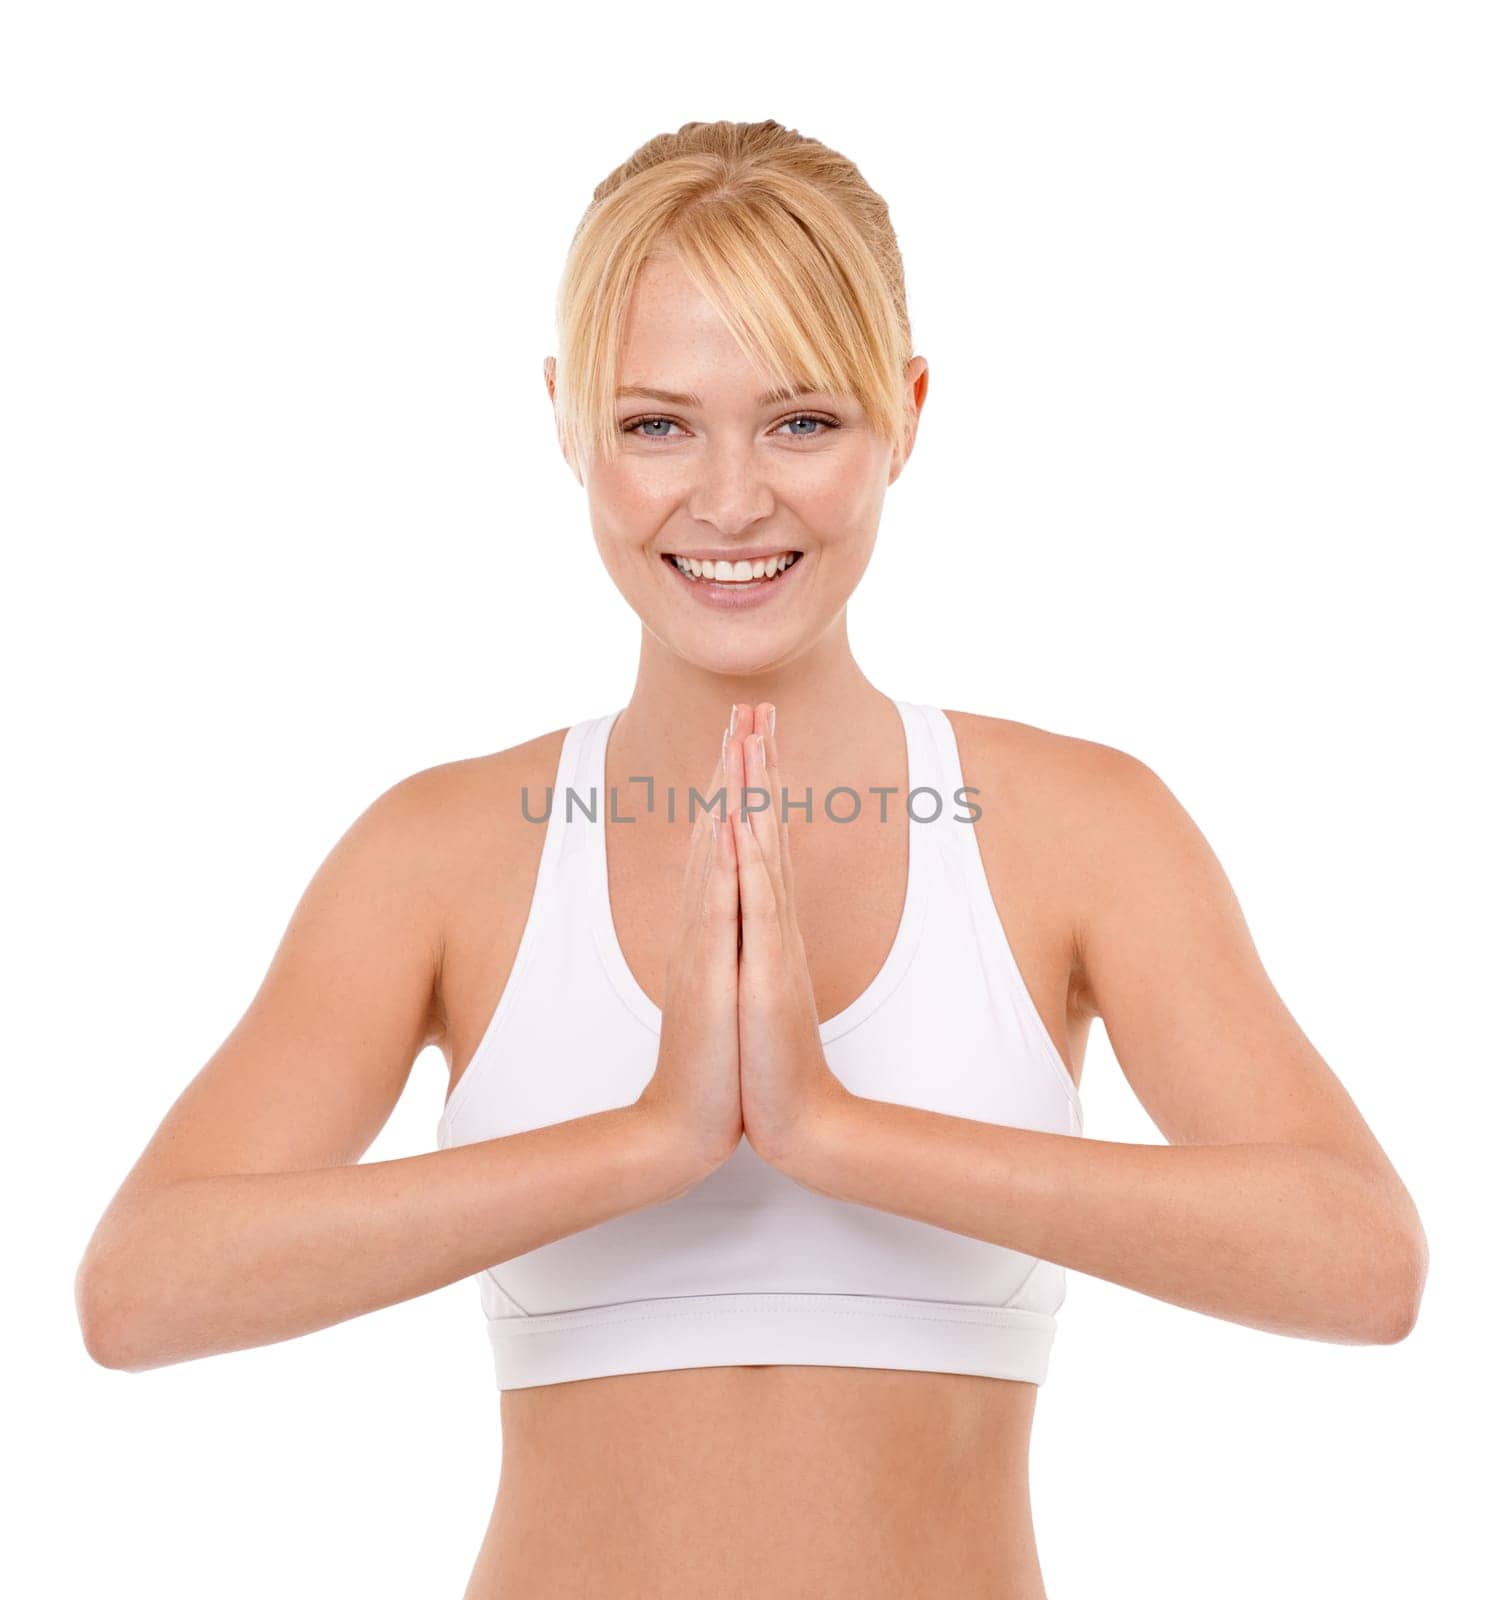 My healthy lifestyle. Portrait of an attractive young woman with her hands in the prayer position